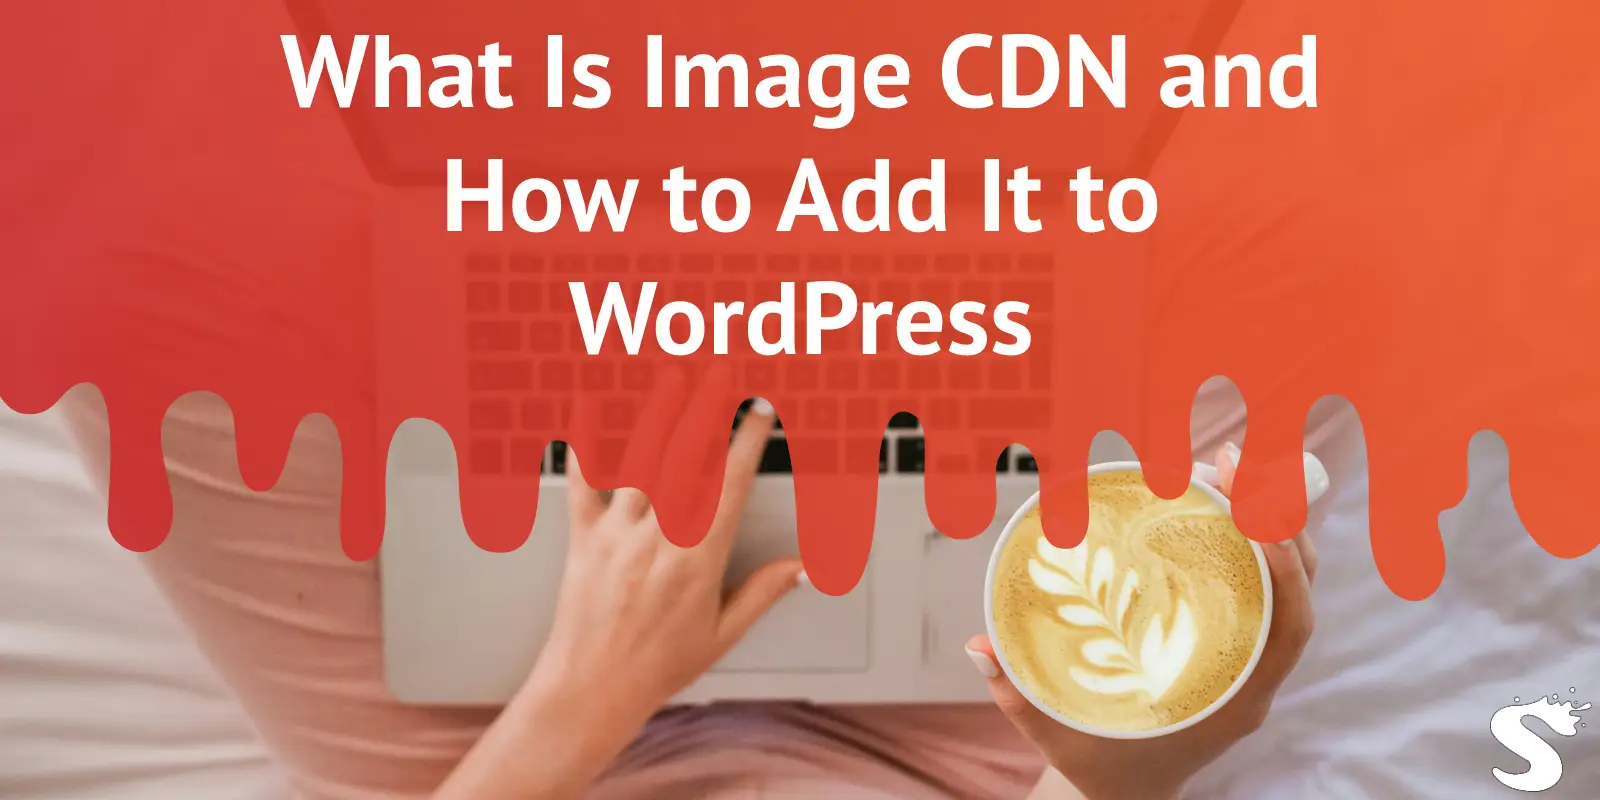 What Is Image CDN and How to Add It to WordPress